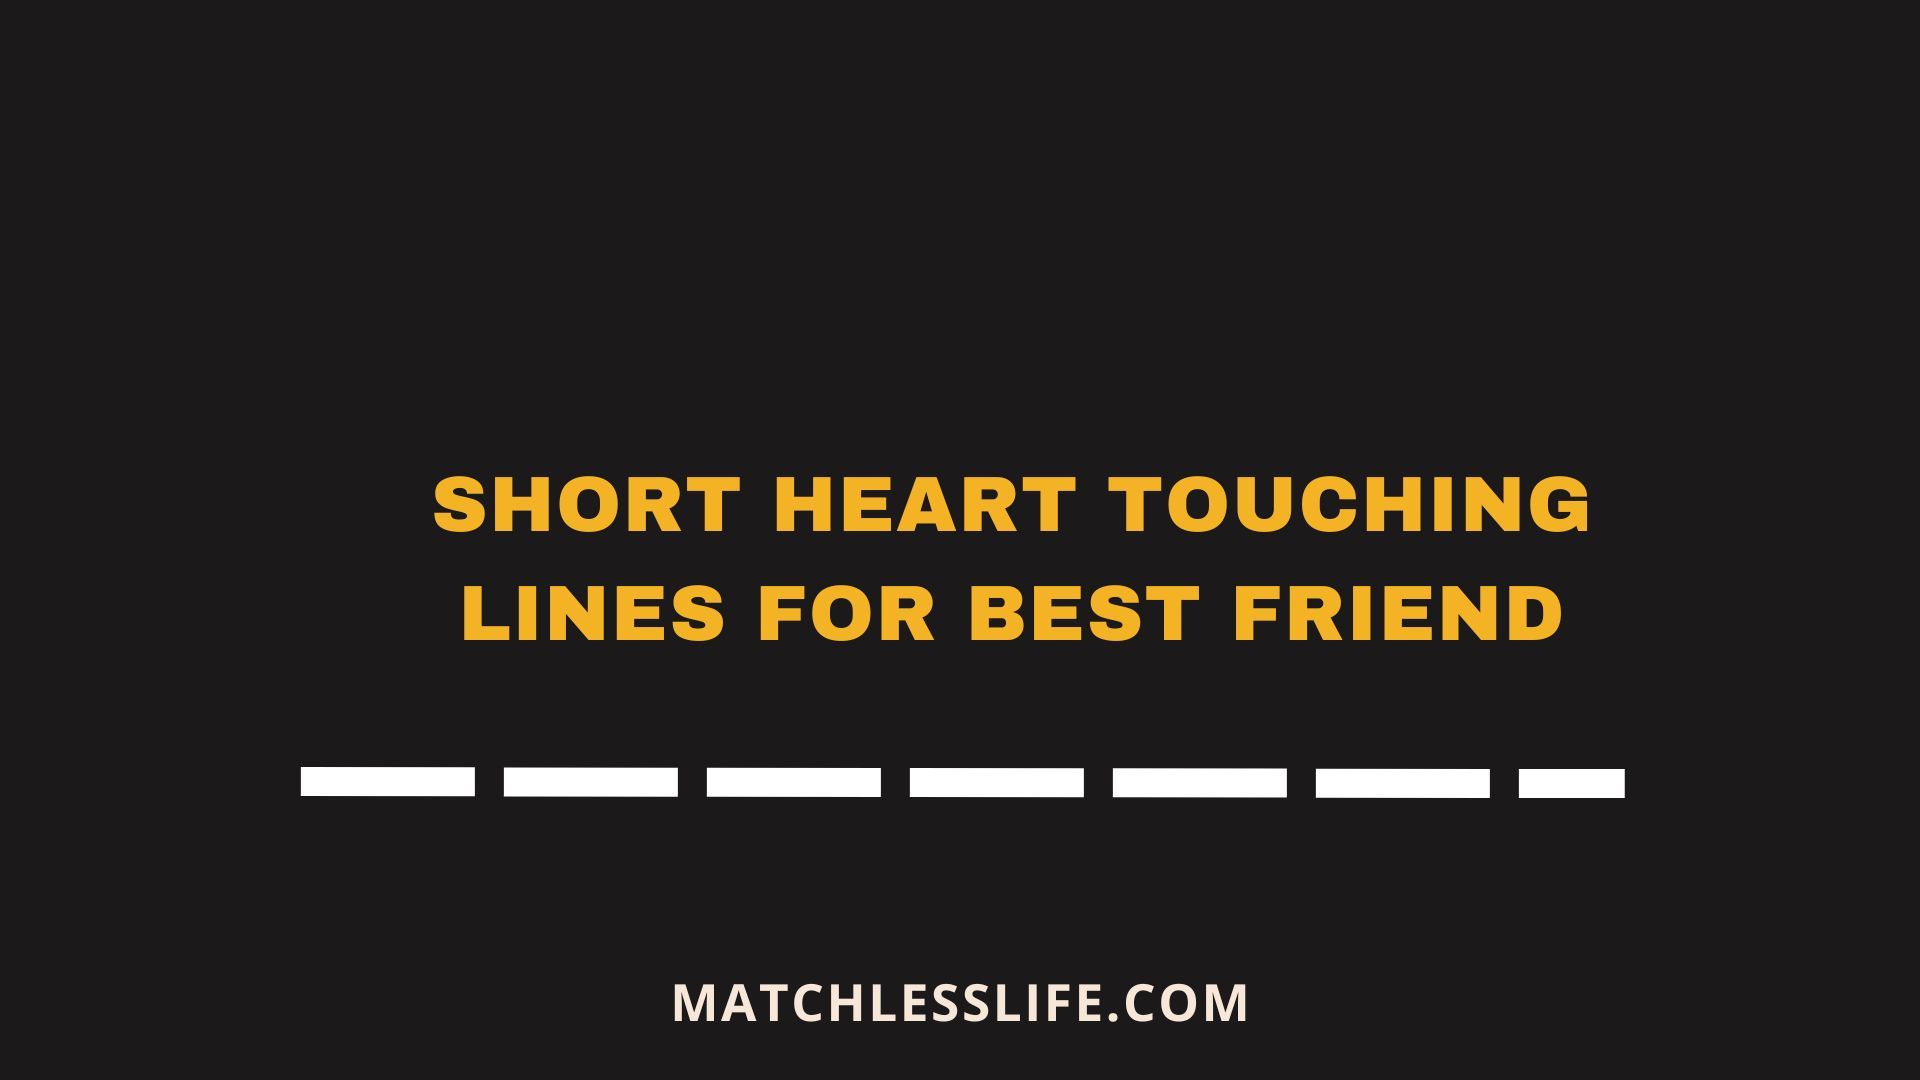 Short Heart Touching Lines For Best Friend